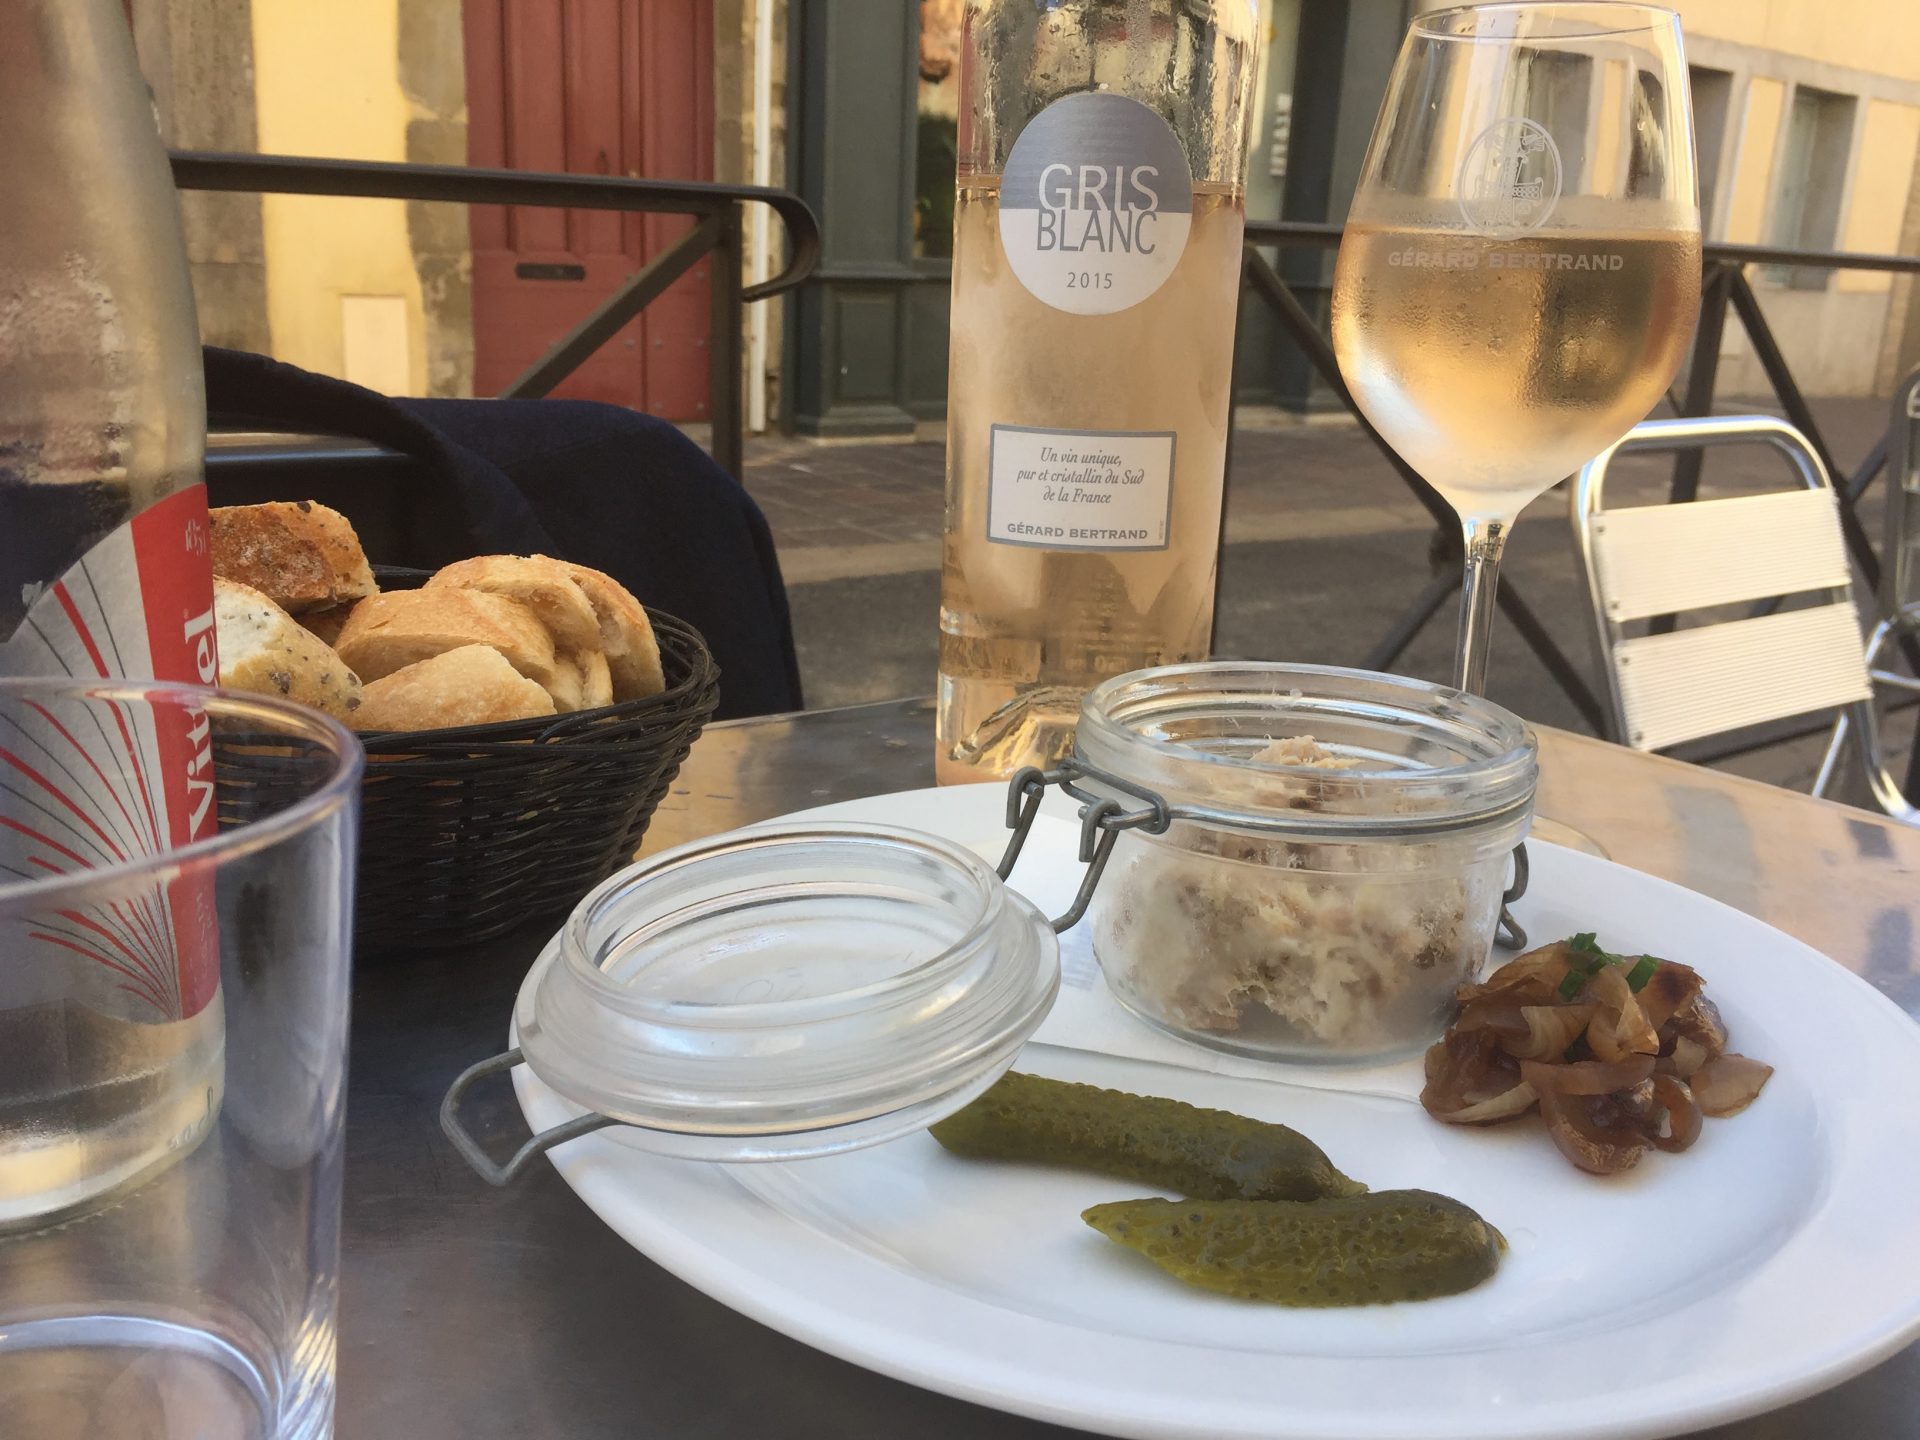 Gerard Bertrand's Gris Blanc Rosé was undoubtedly one of the crowd favourites, pictured here with rabbit rillettes.